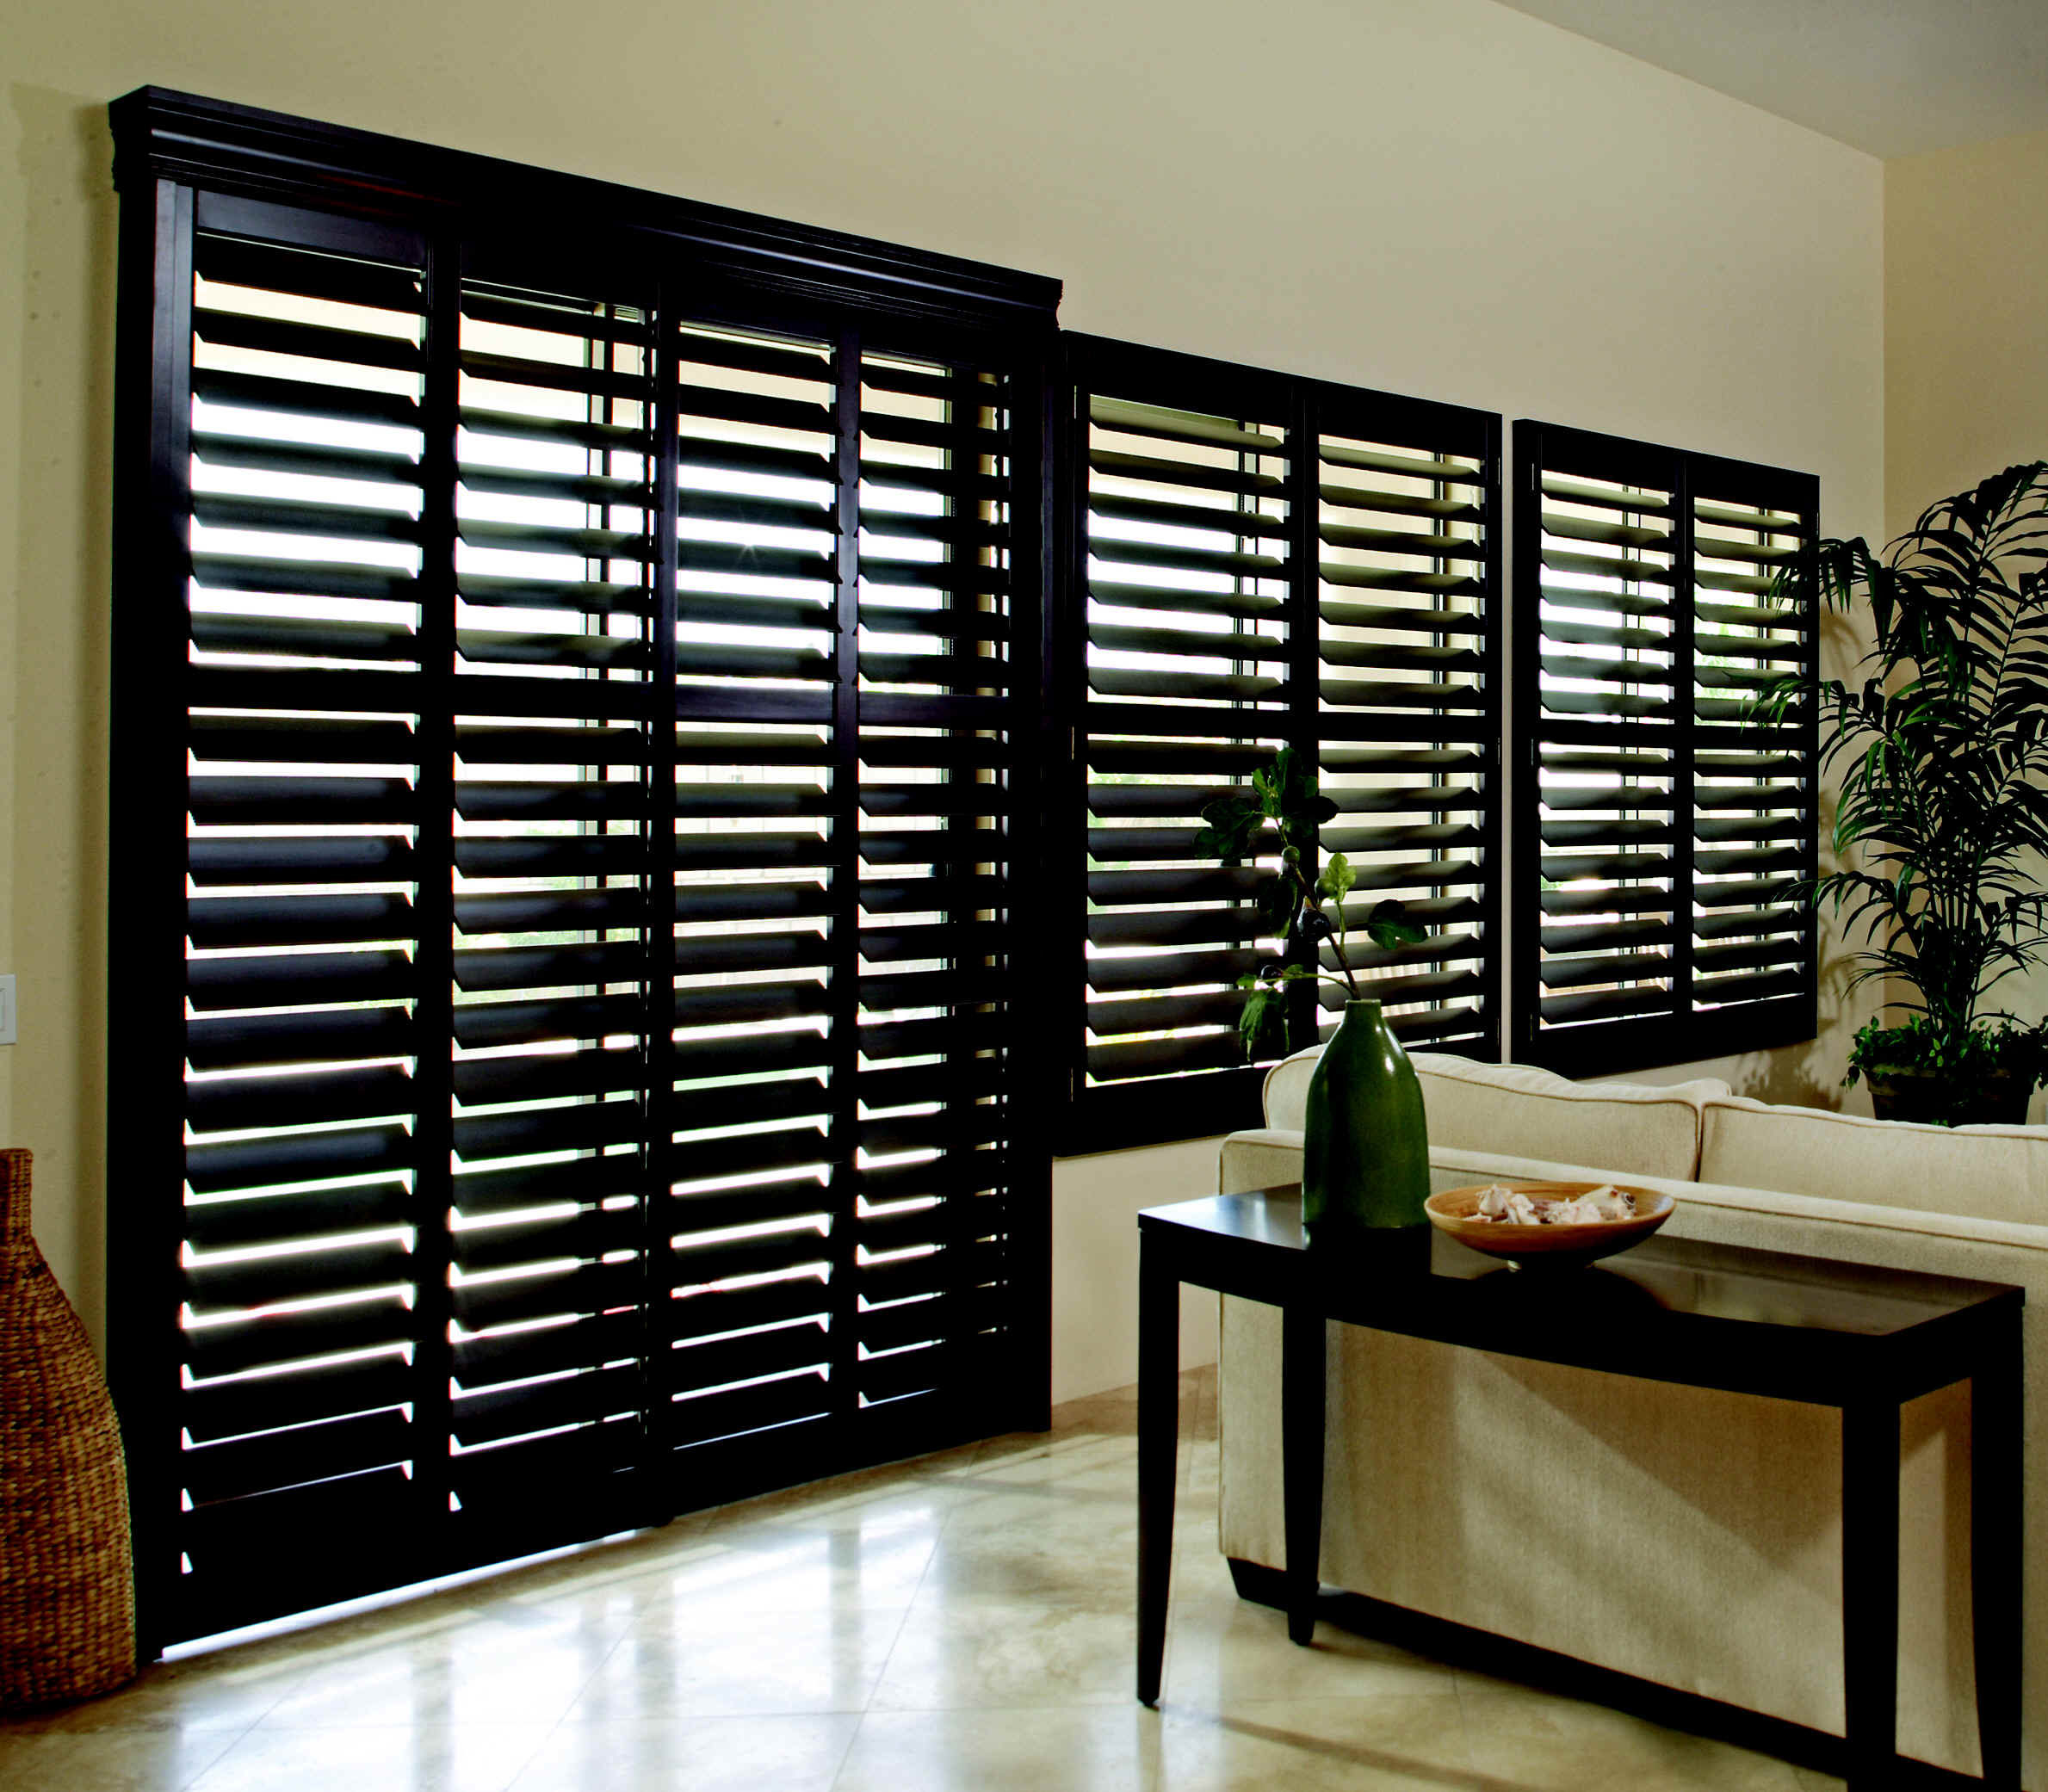 Clearview Shutters For Sale At Low Prices in Auburn